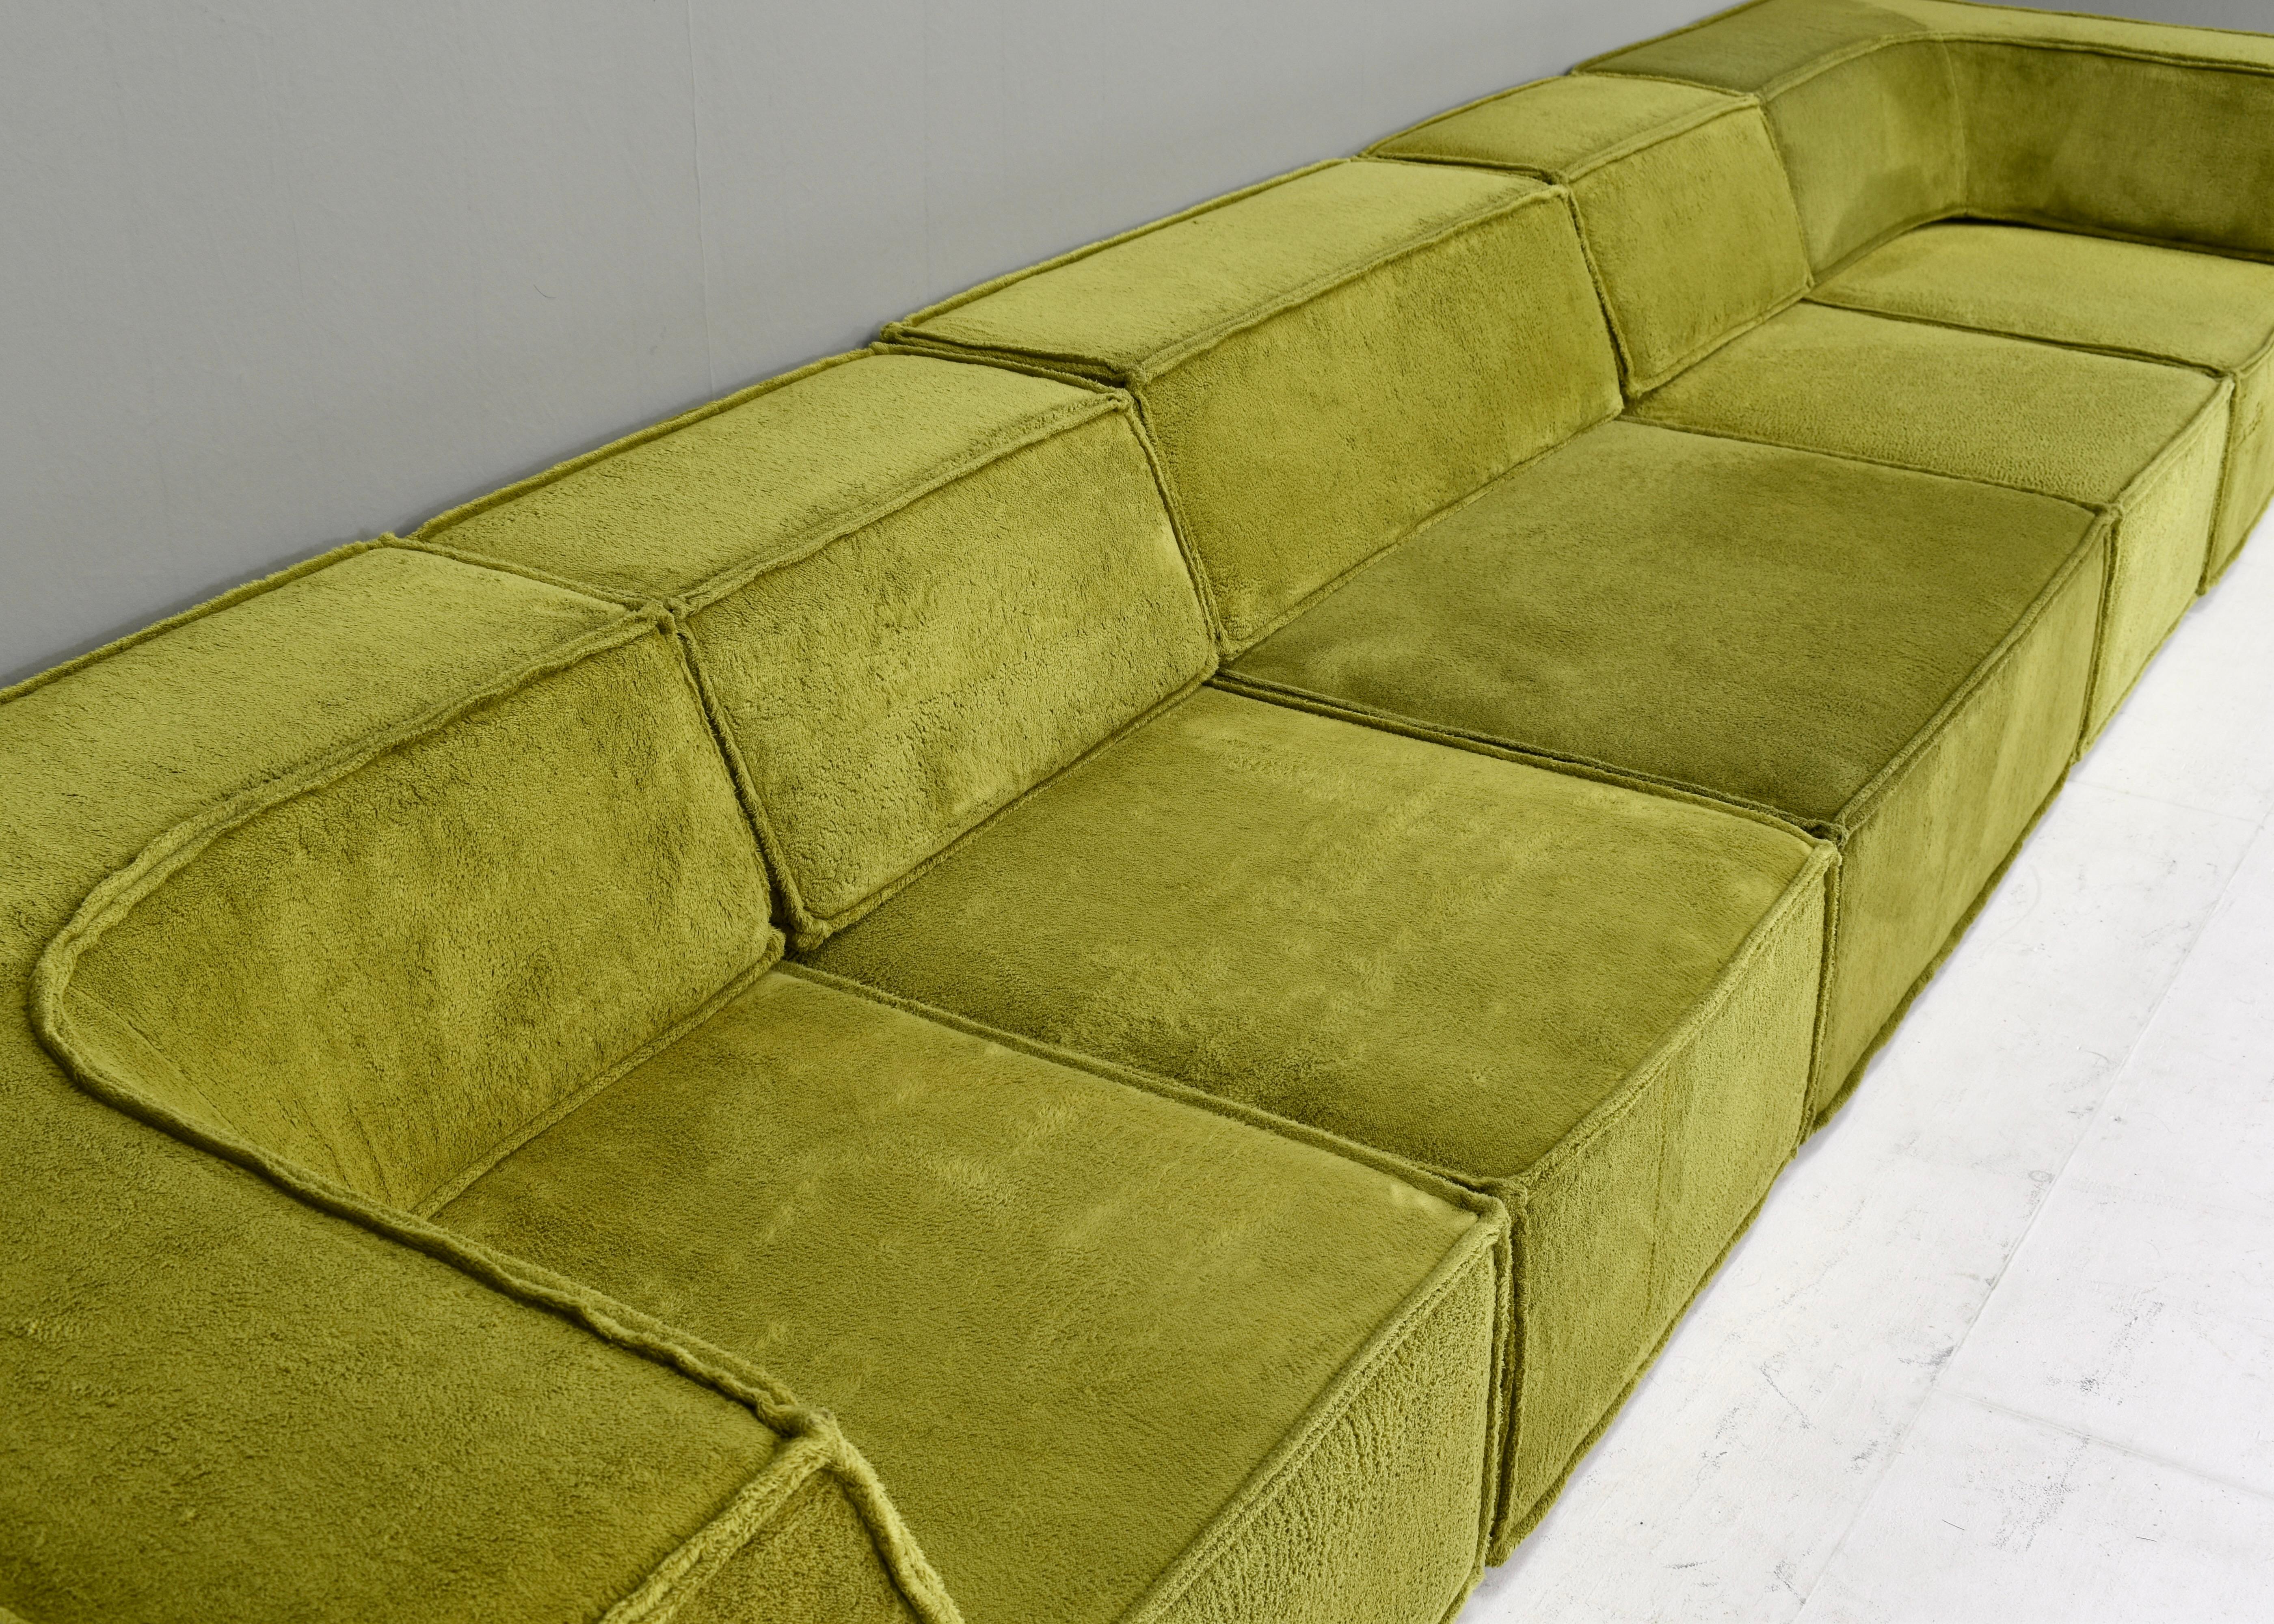 COR Trio Sectional Sofa by Team Form Ag for COR, Germany / Switzerland, 1972 6